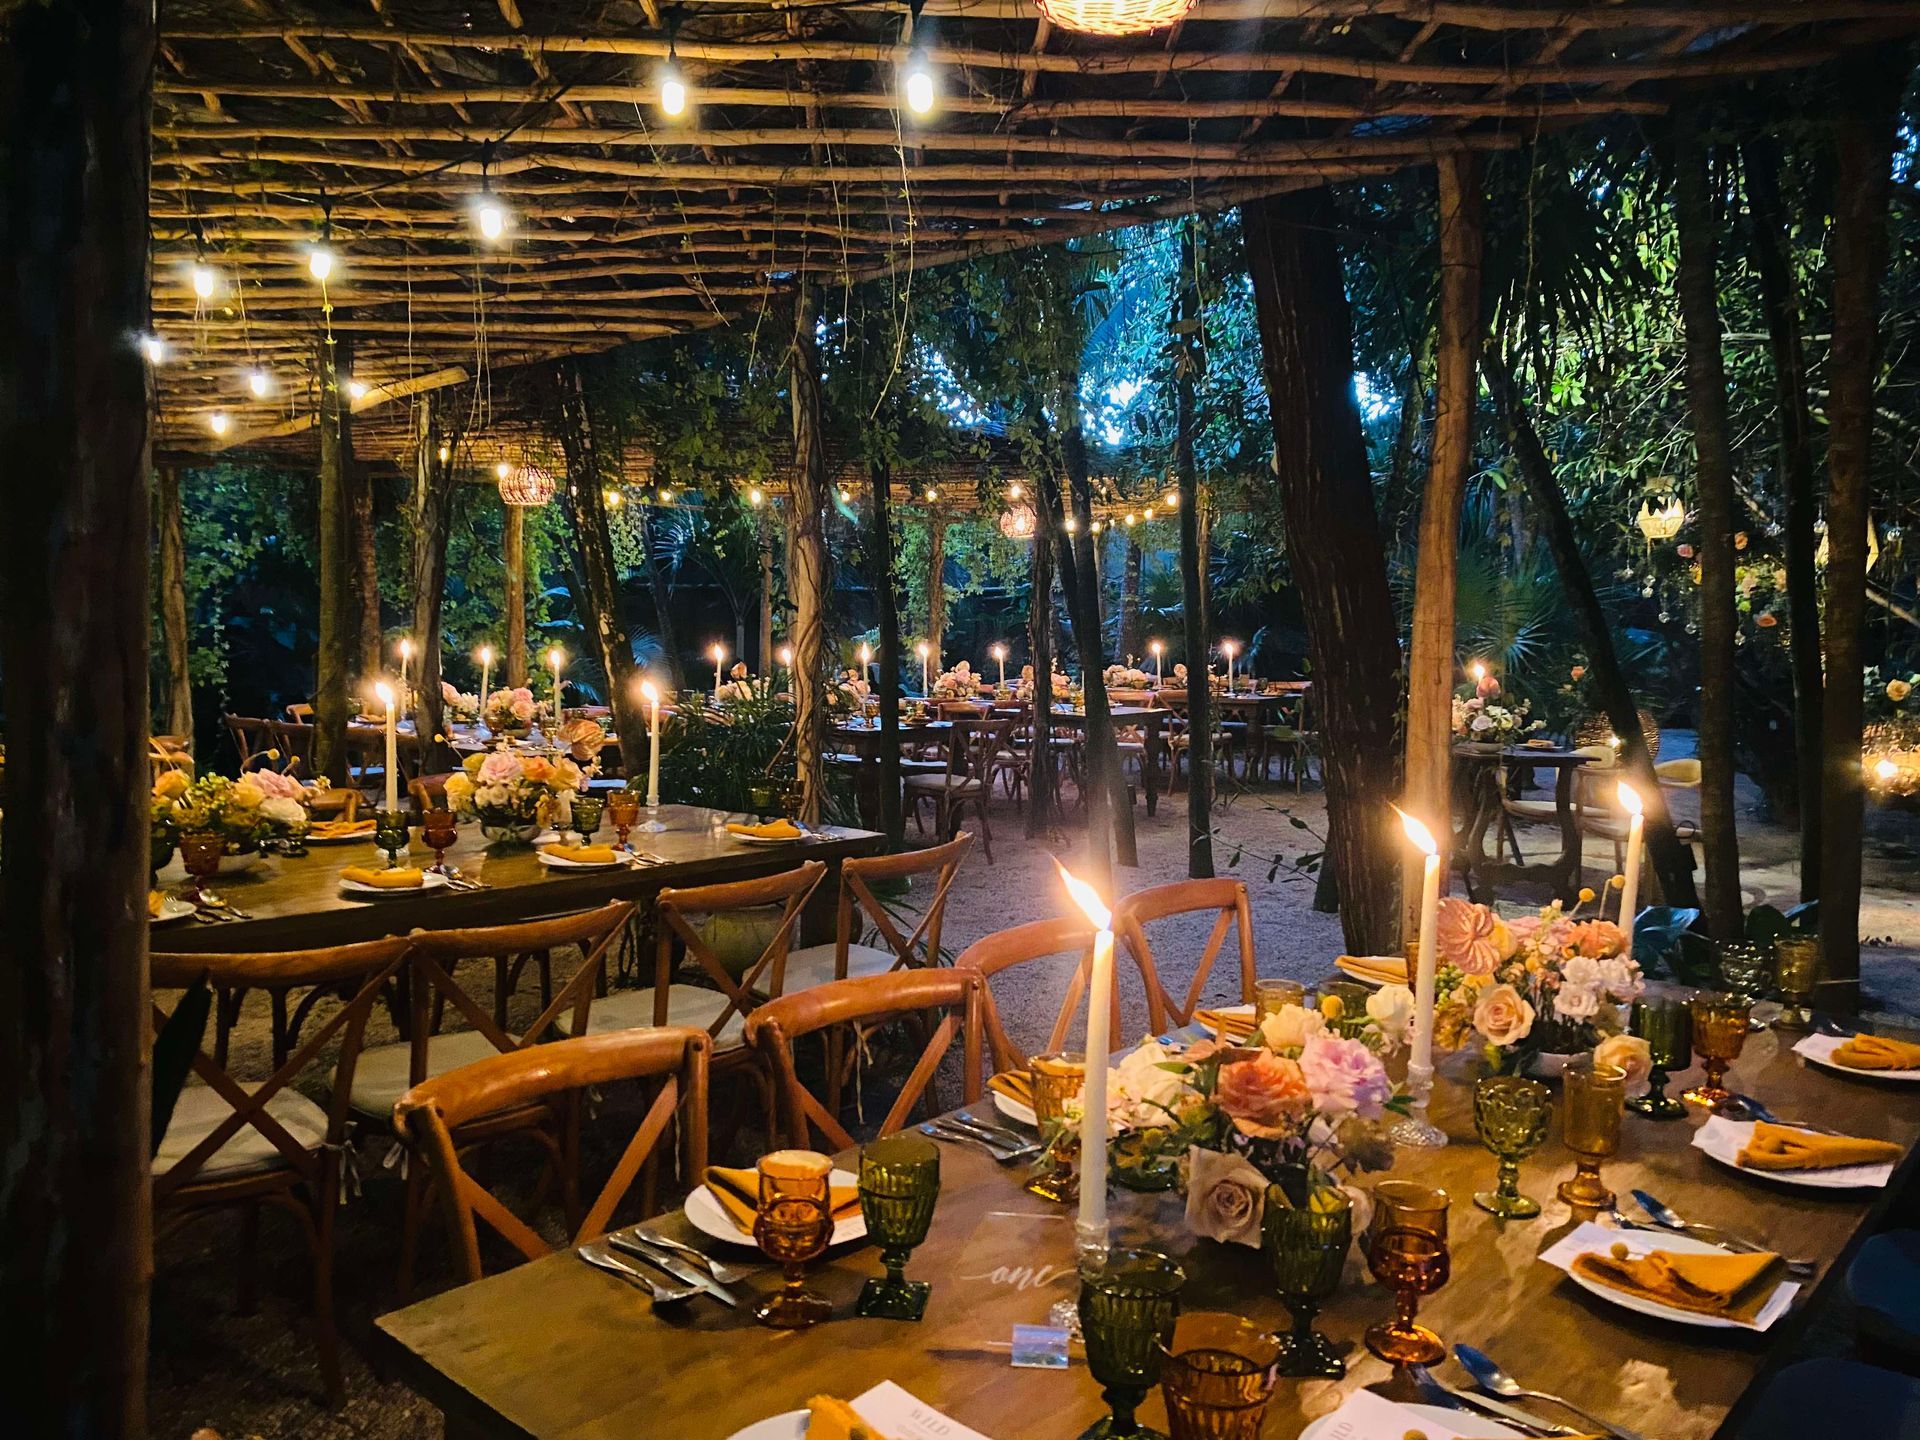 A table set for a wedding reception in the woods with candles and flowers on it 